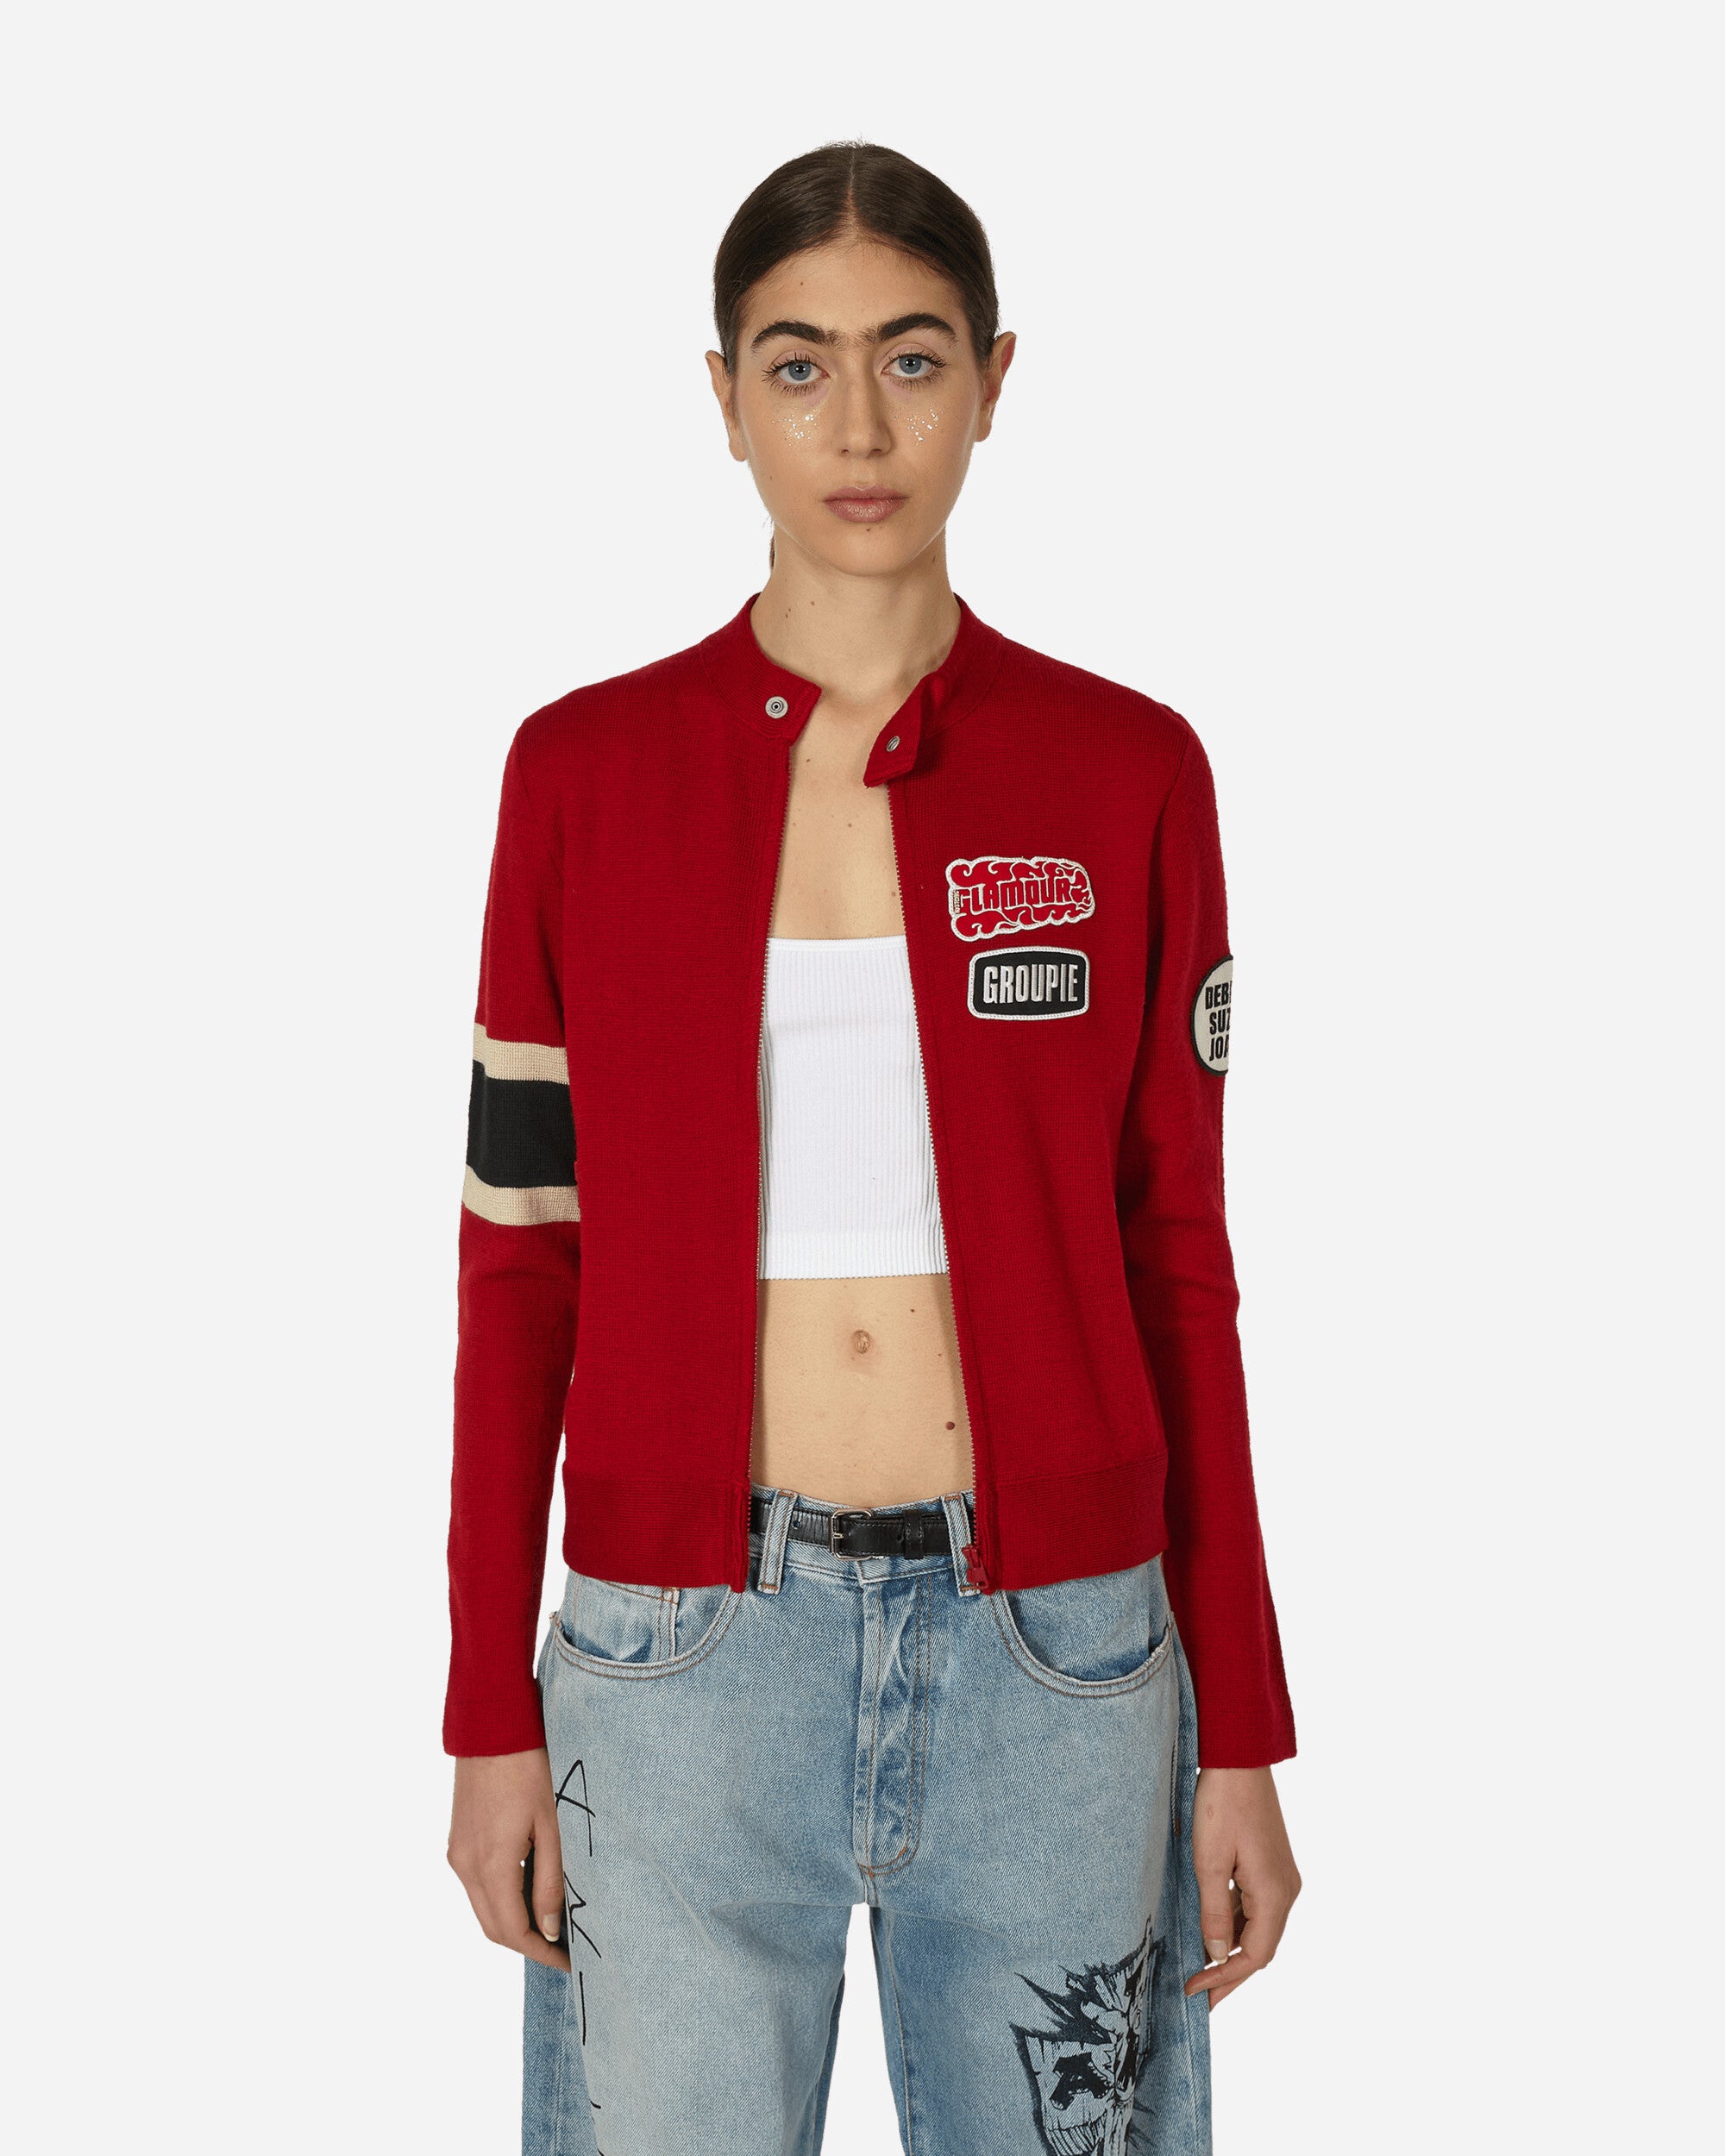 Hysteric Glamour Wmns Flaming Girl Moto Jacket Red Coats and Jackets Jackets 01233NJ019 RED